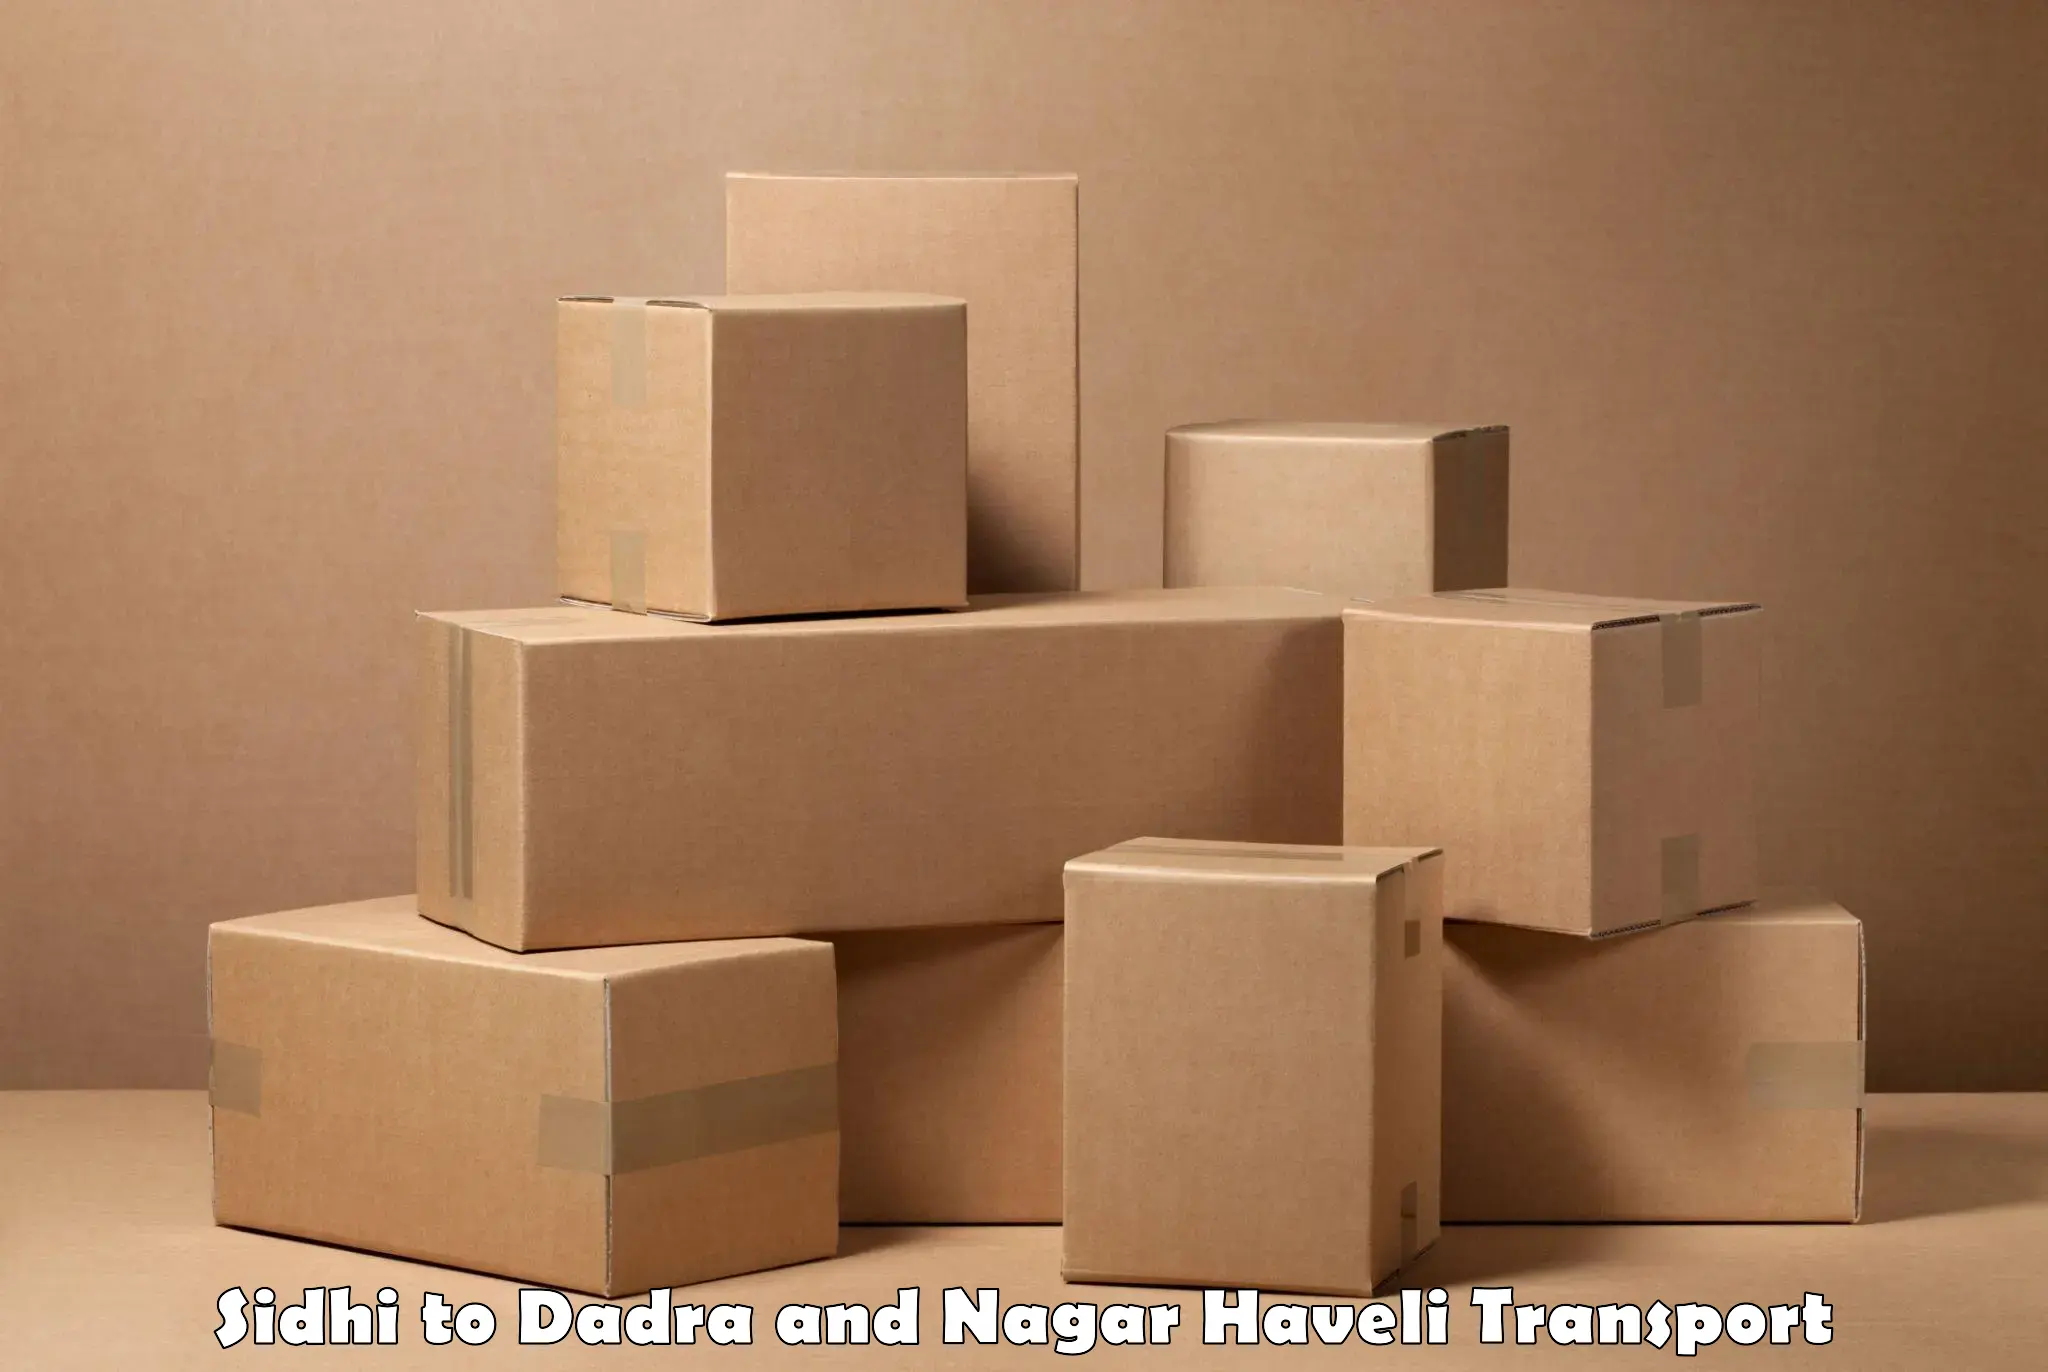 Air freight transport services Sidhi to Dadra and Nagar Haveli